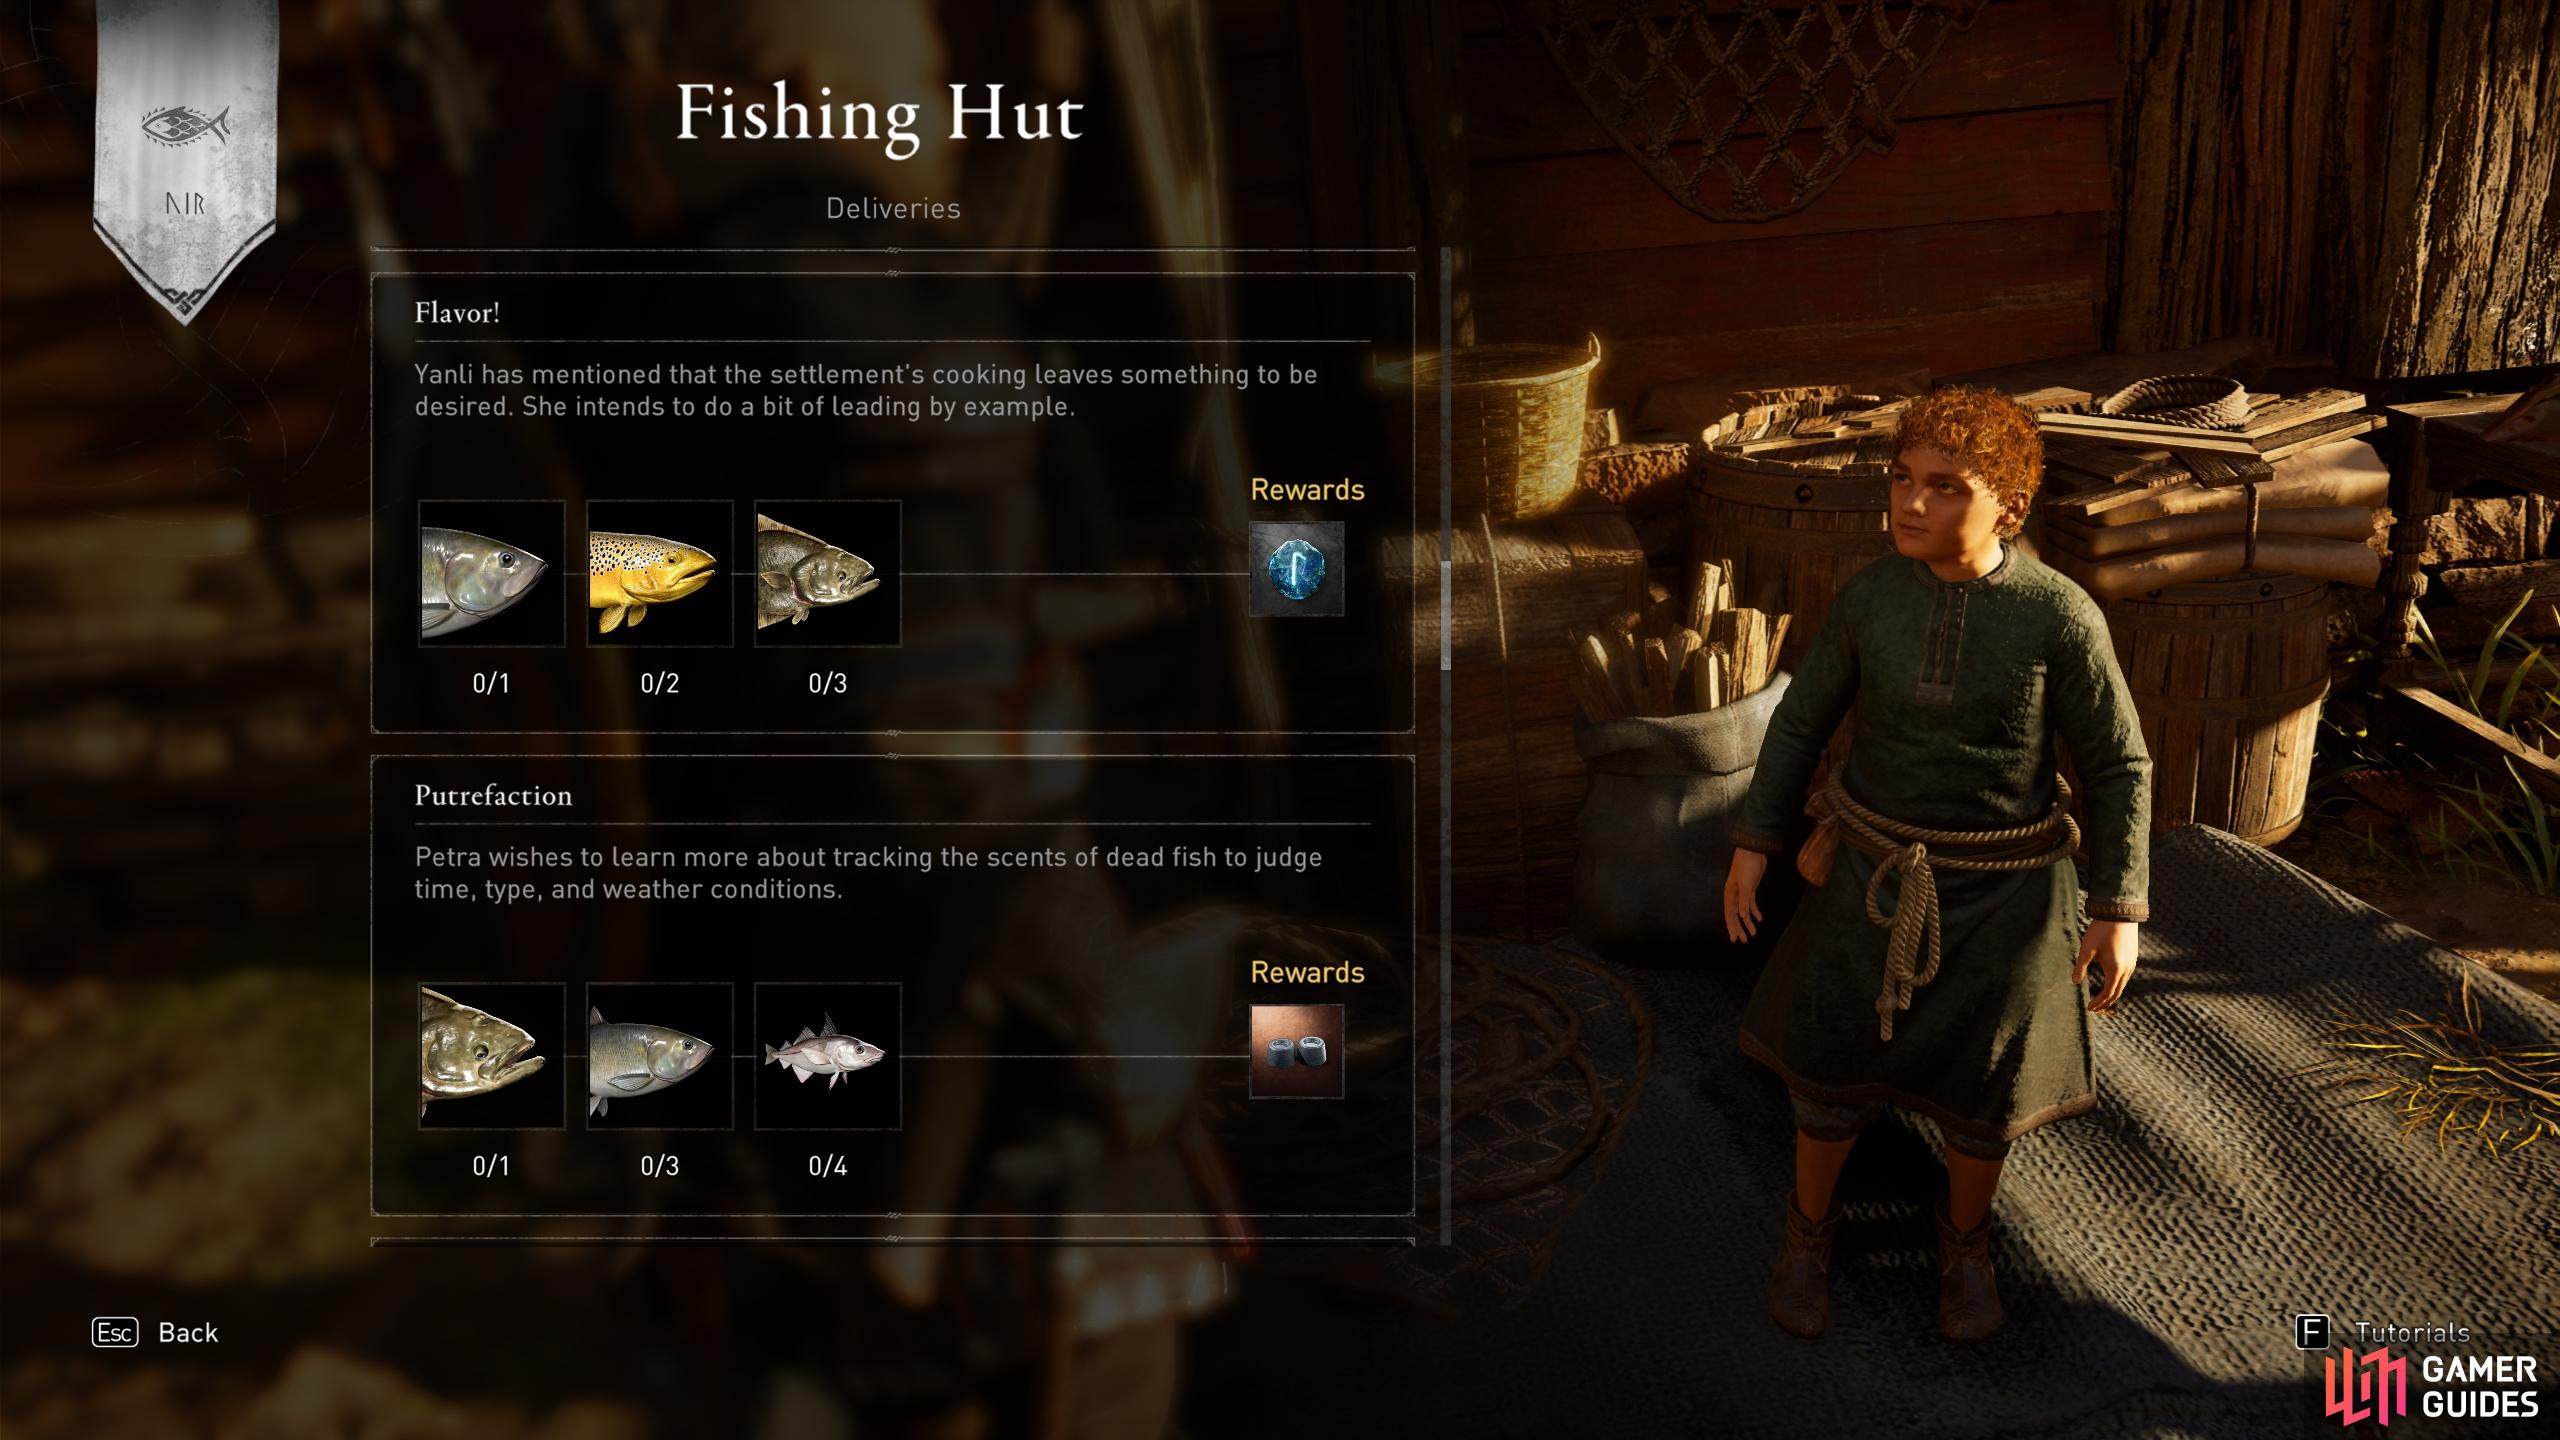 You can hand in specific fish at the Fishing Hut in exchange for unique rewards.